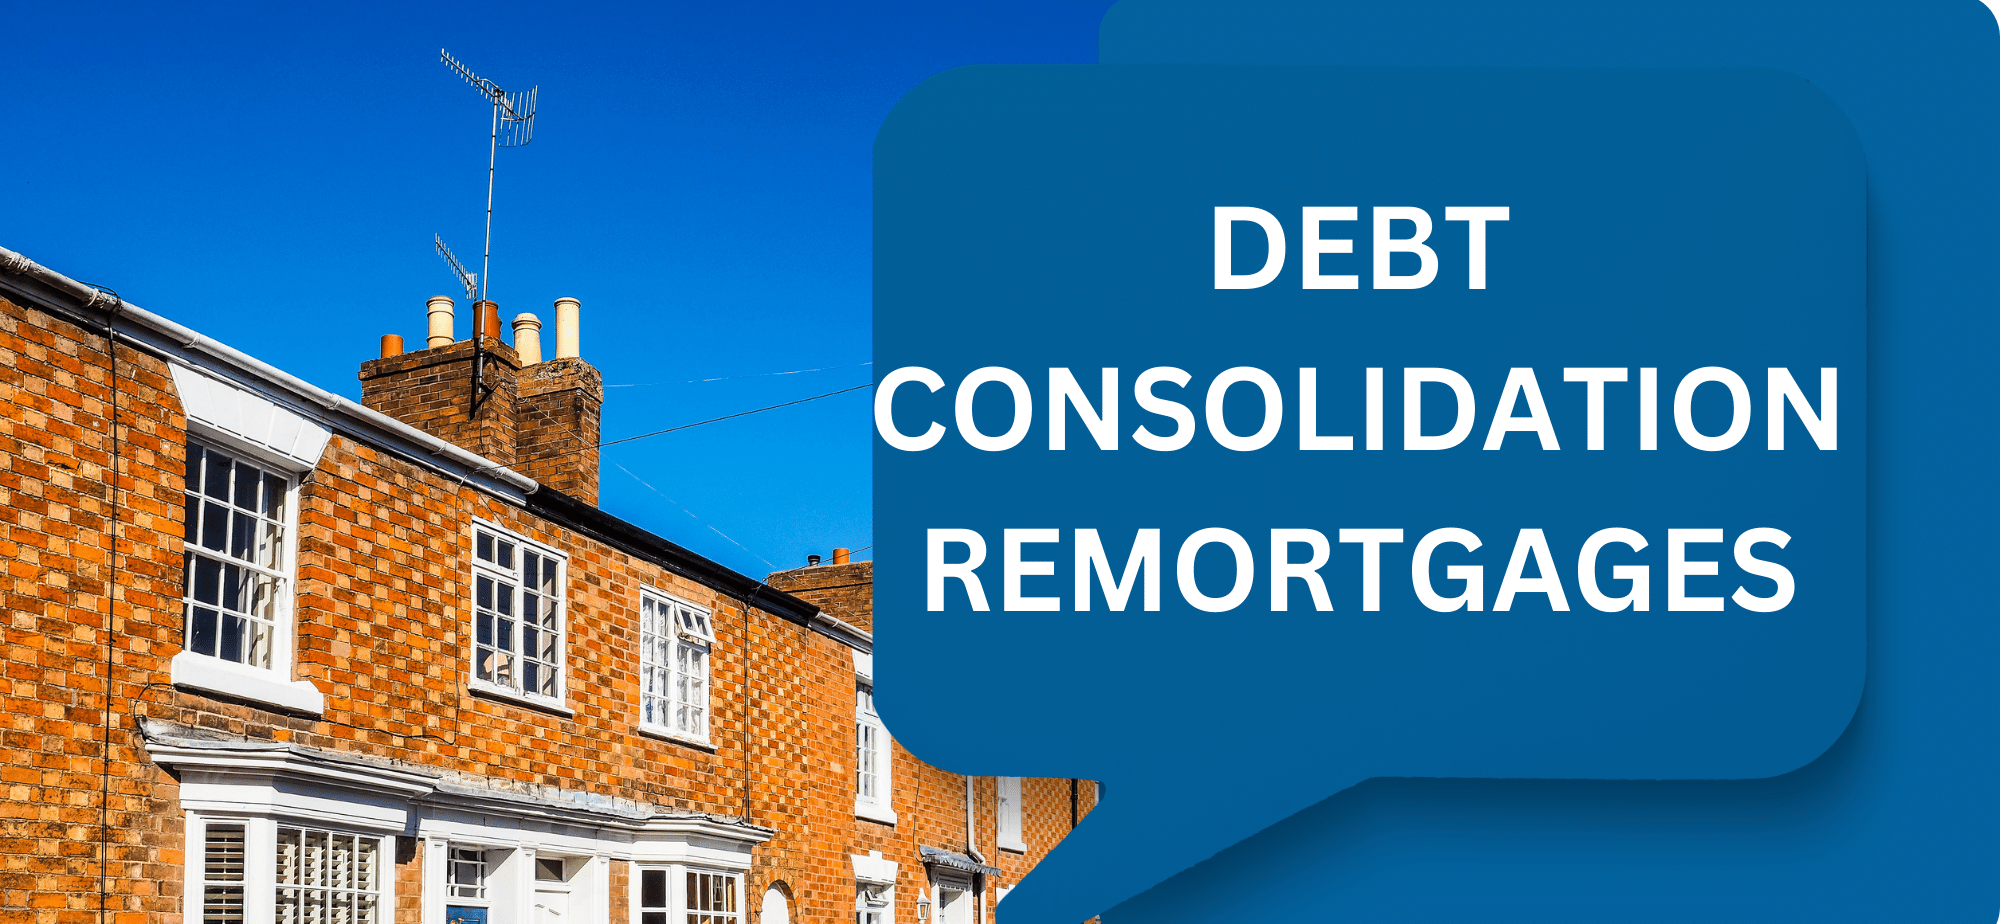 Debt Consolidation remortgages